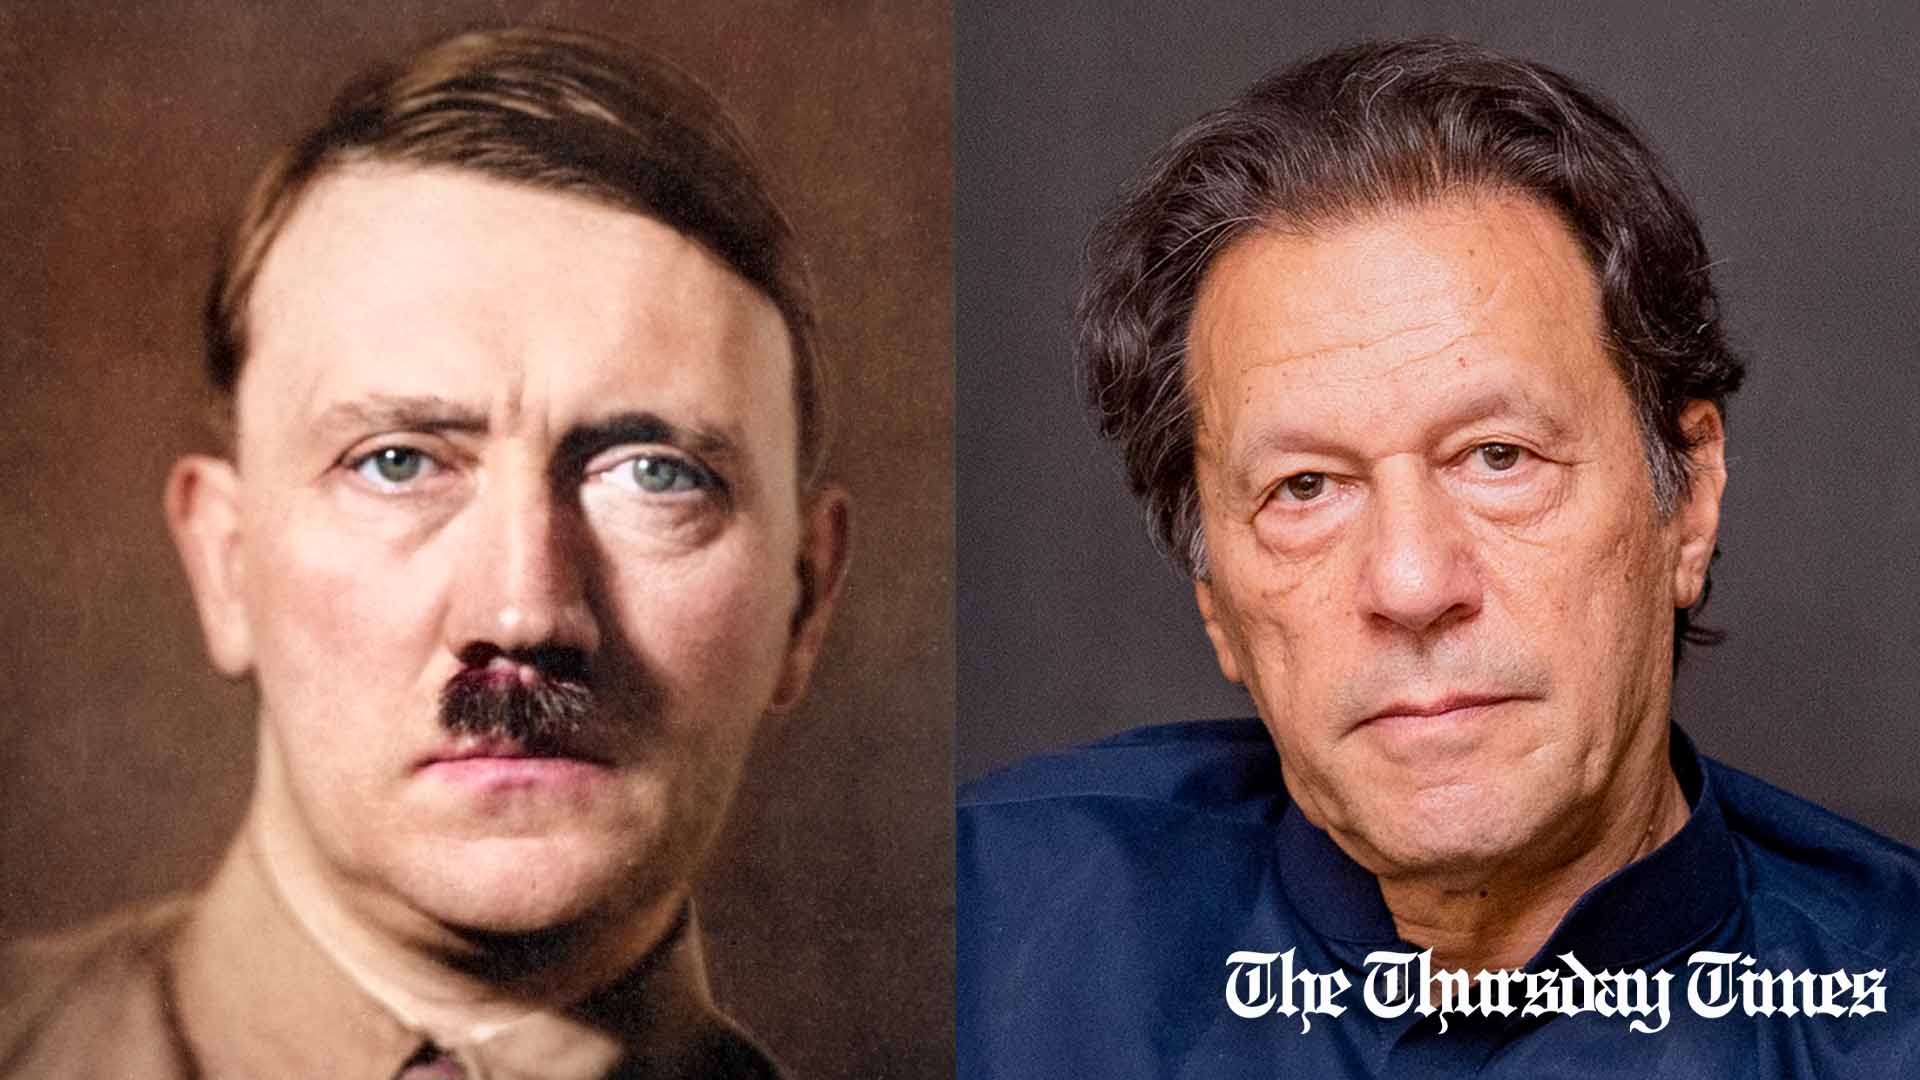 A combined file photo is shown of former German dictator Adolf Hitler in 1936 (L) alongside PTI chairman Imran Khan (R). — FILE/THE THURSDAY TIMES